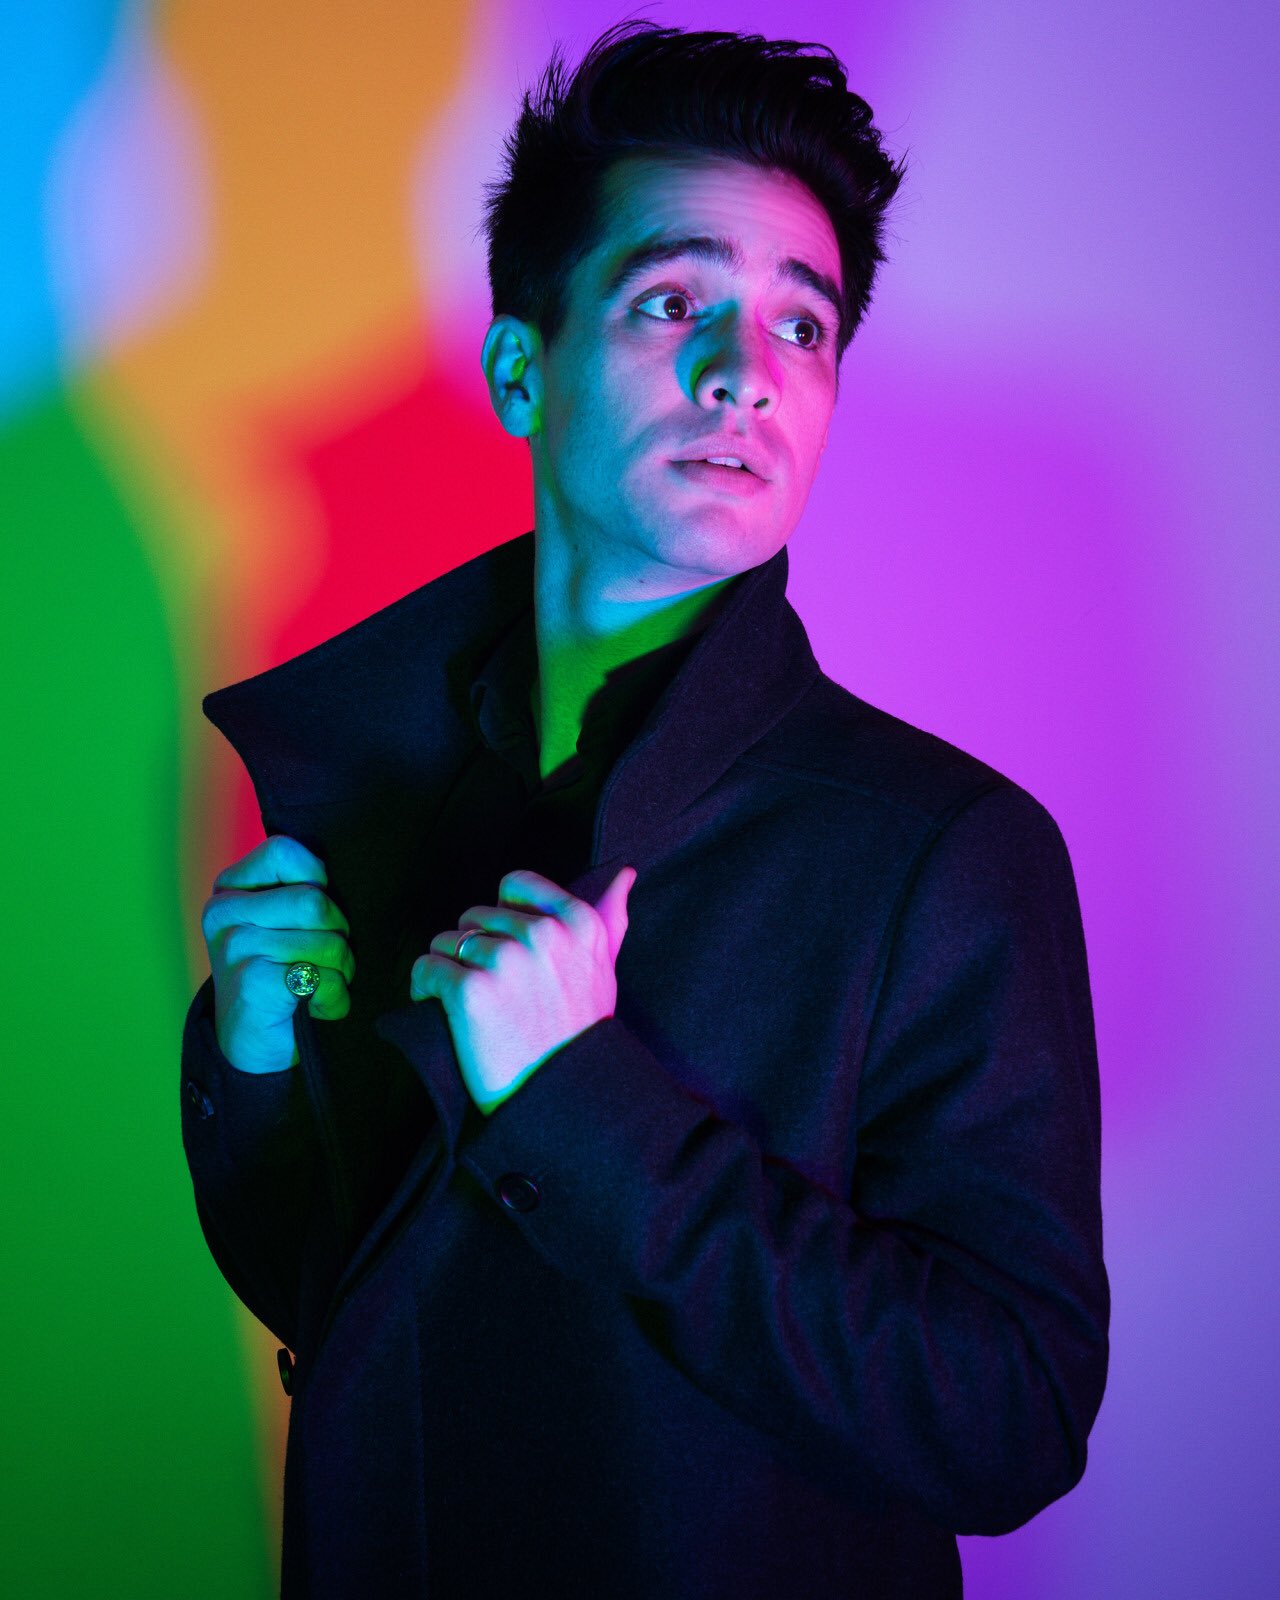 HAPPY 31ST BIRTHDAY TO BRENDON URIE 